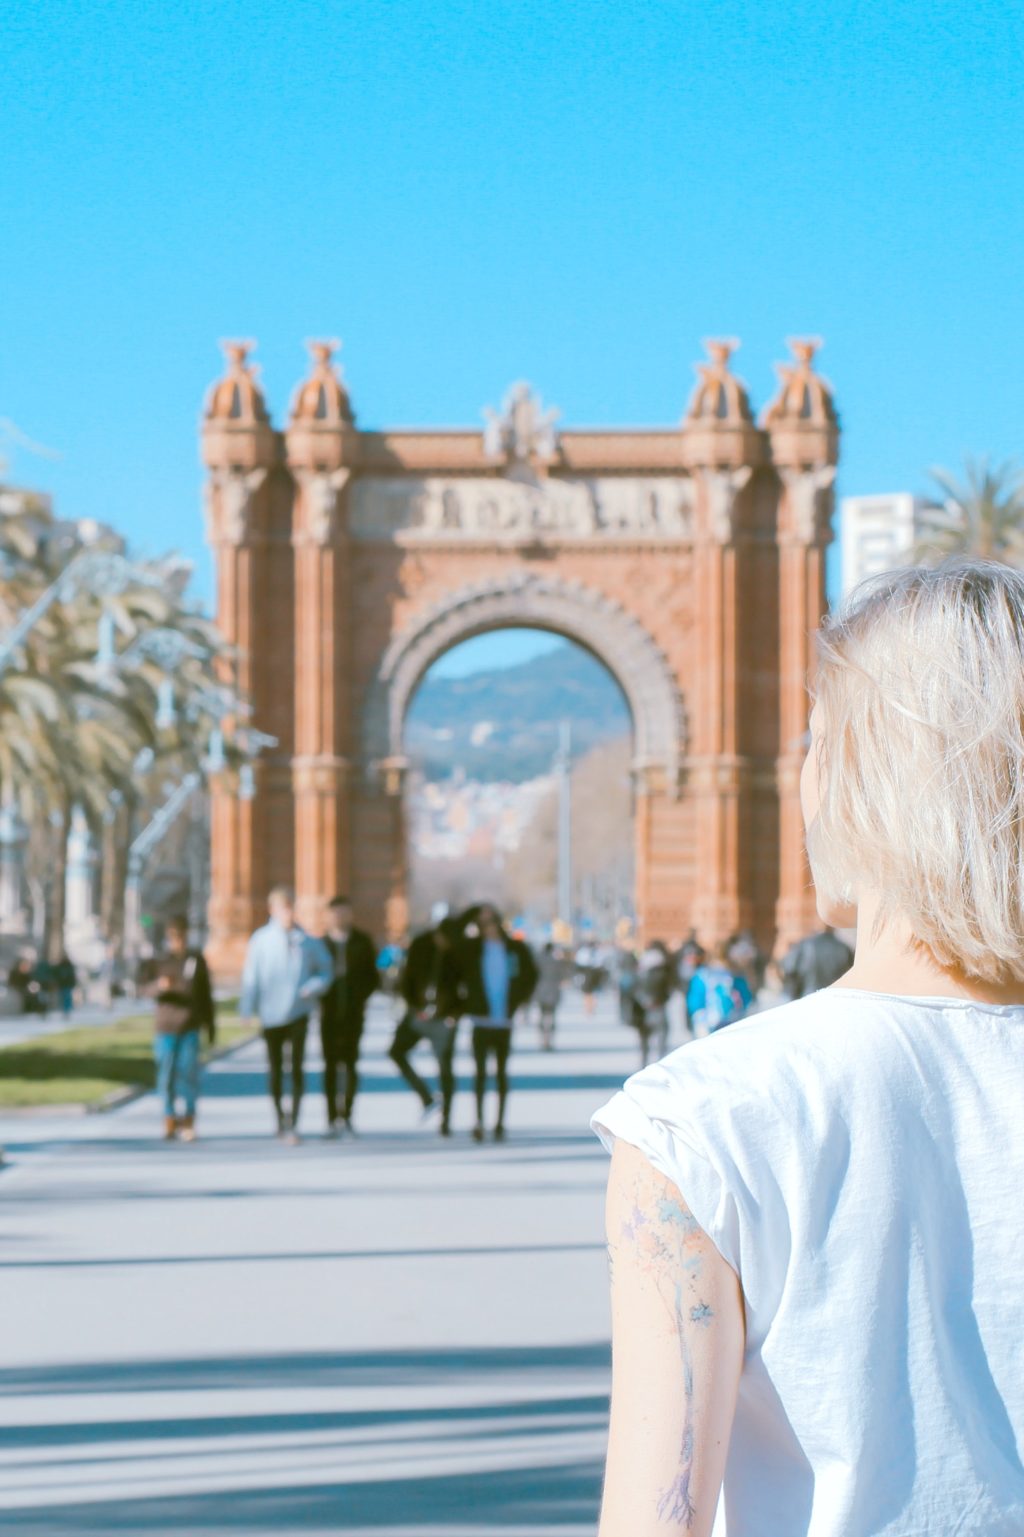 4 Reasons You Should Consider Studying in Spain